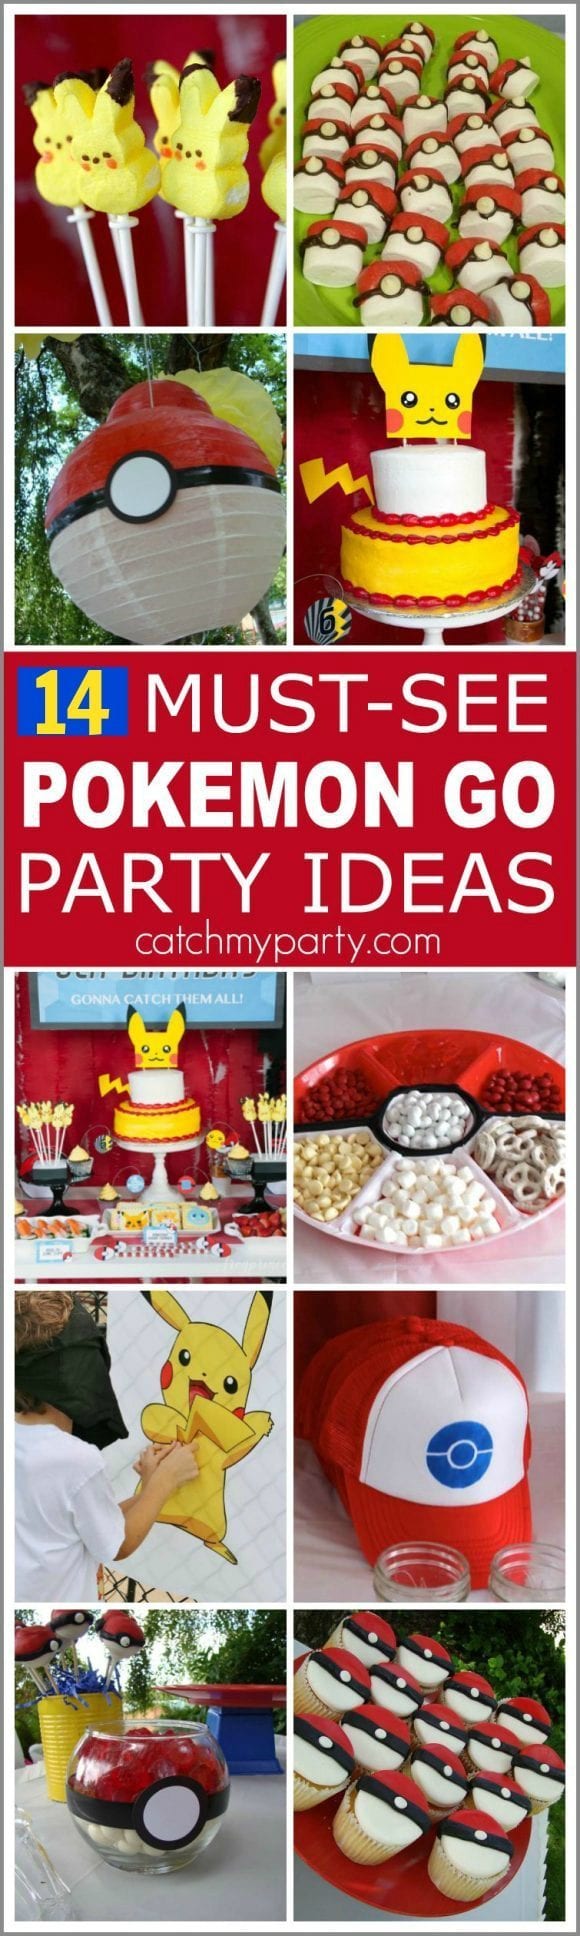 14 Must-See Pokemon Go Party Ideas | CatchMyParty.com